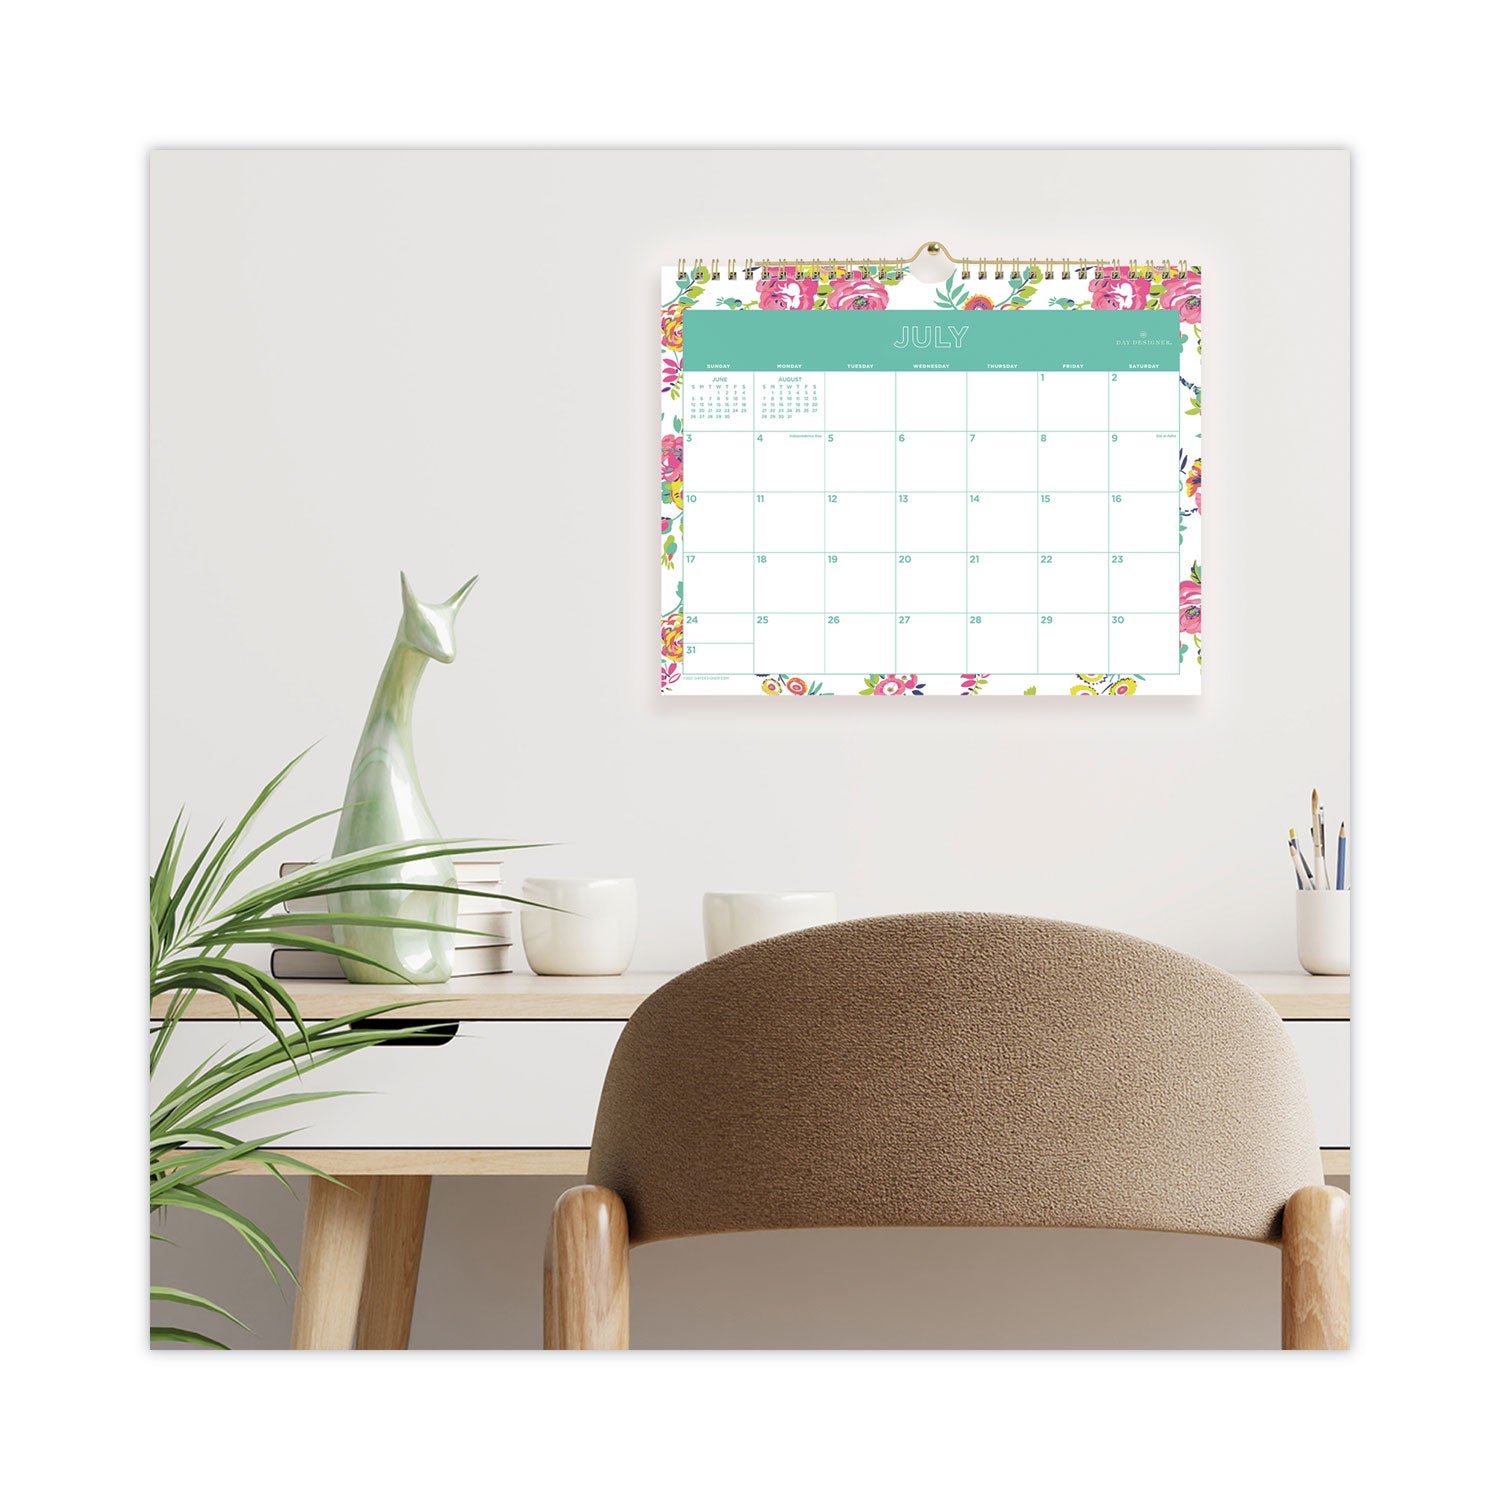 day-designer-peyton-academic-wall-calendar-floral-artwork-11-x-875-white-sheets-12-month-july-to-june-2023-to-2024_bls107936 - 3